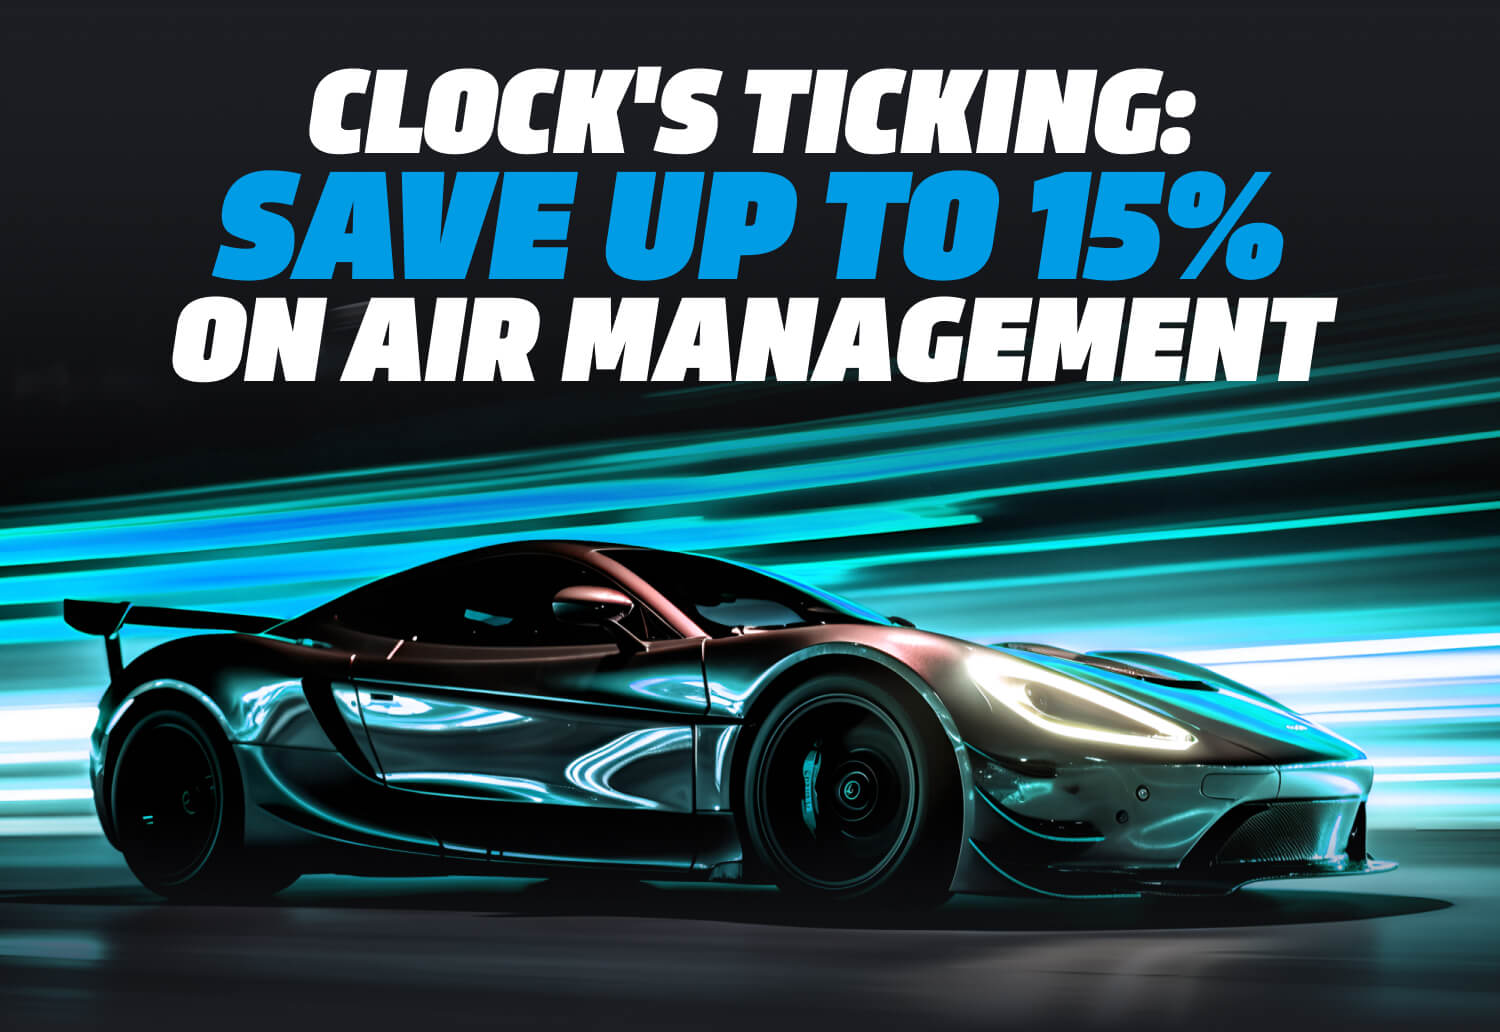  Clock's Ticking: Save Up To 15% on Air Management